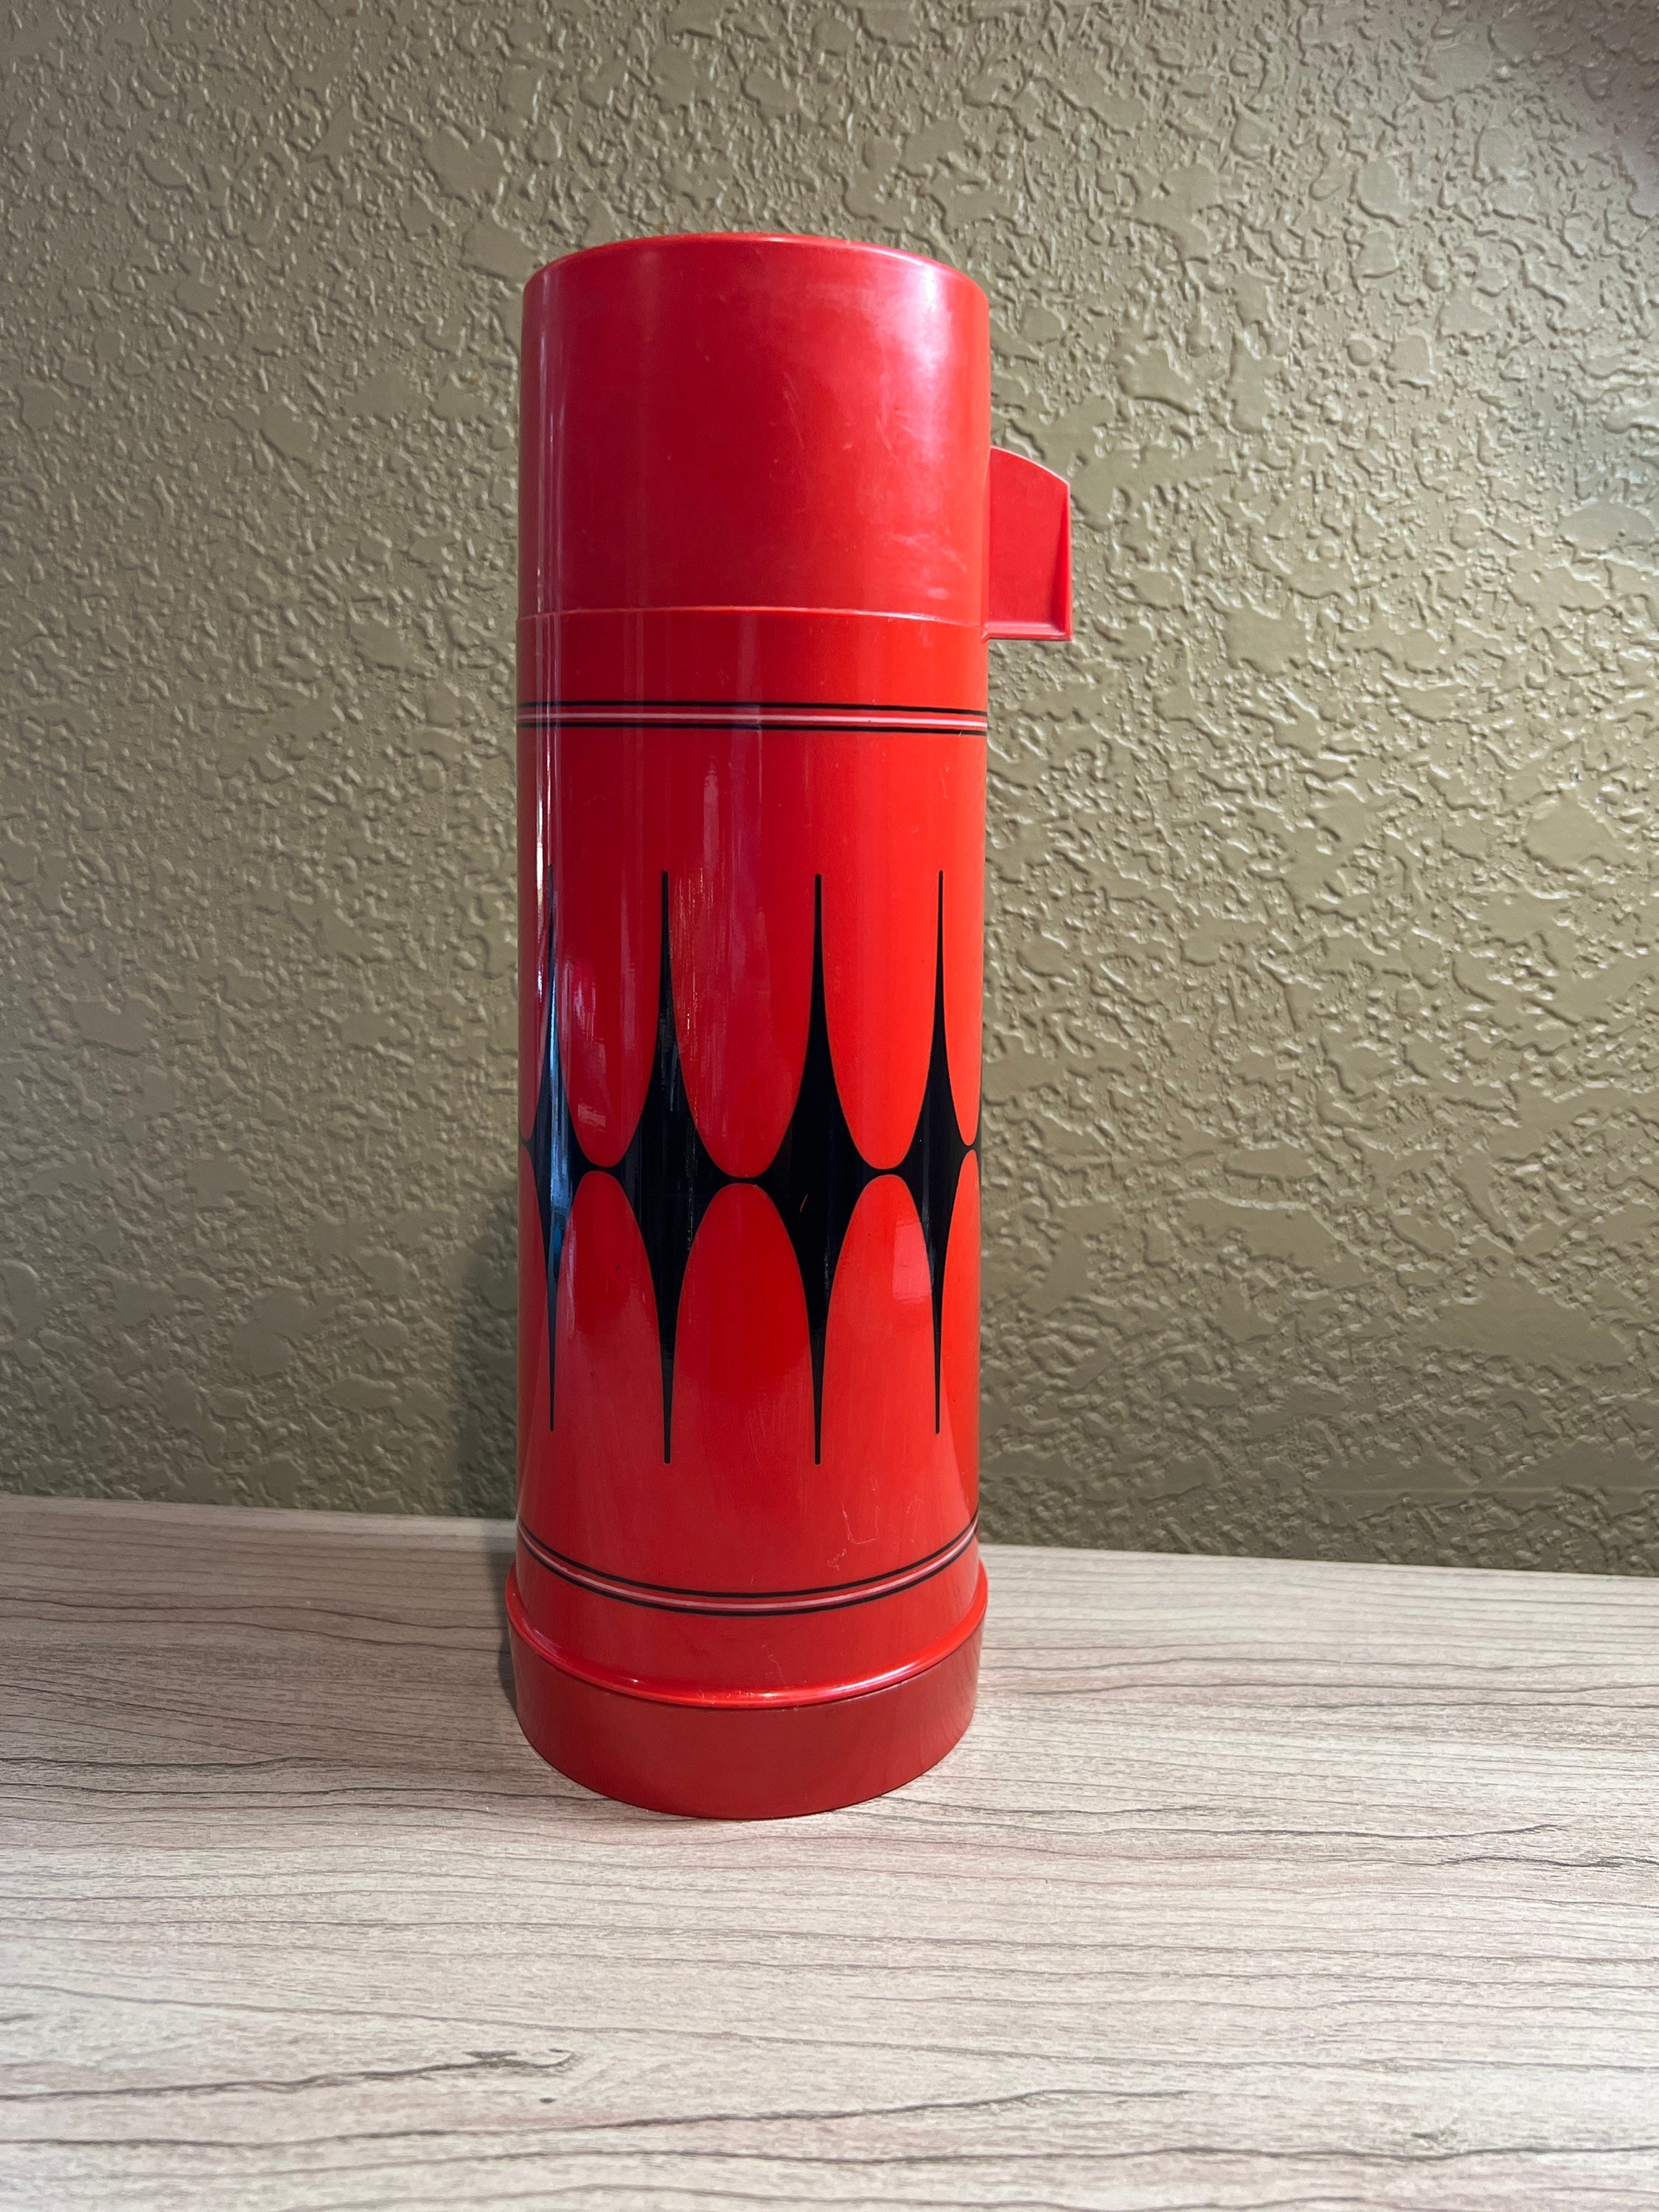 Vintage Aladdin Small Thermos Blue Red Brown Soup Thermos 3 